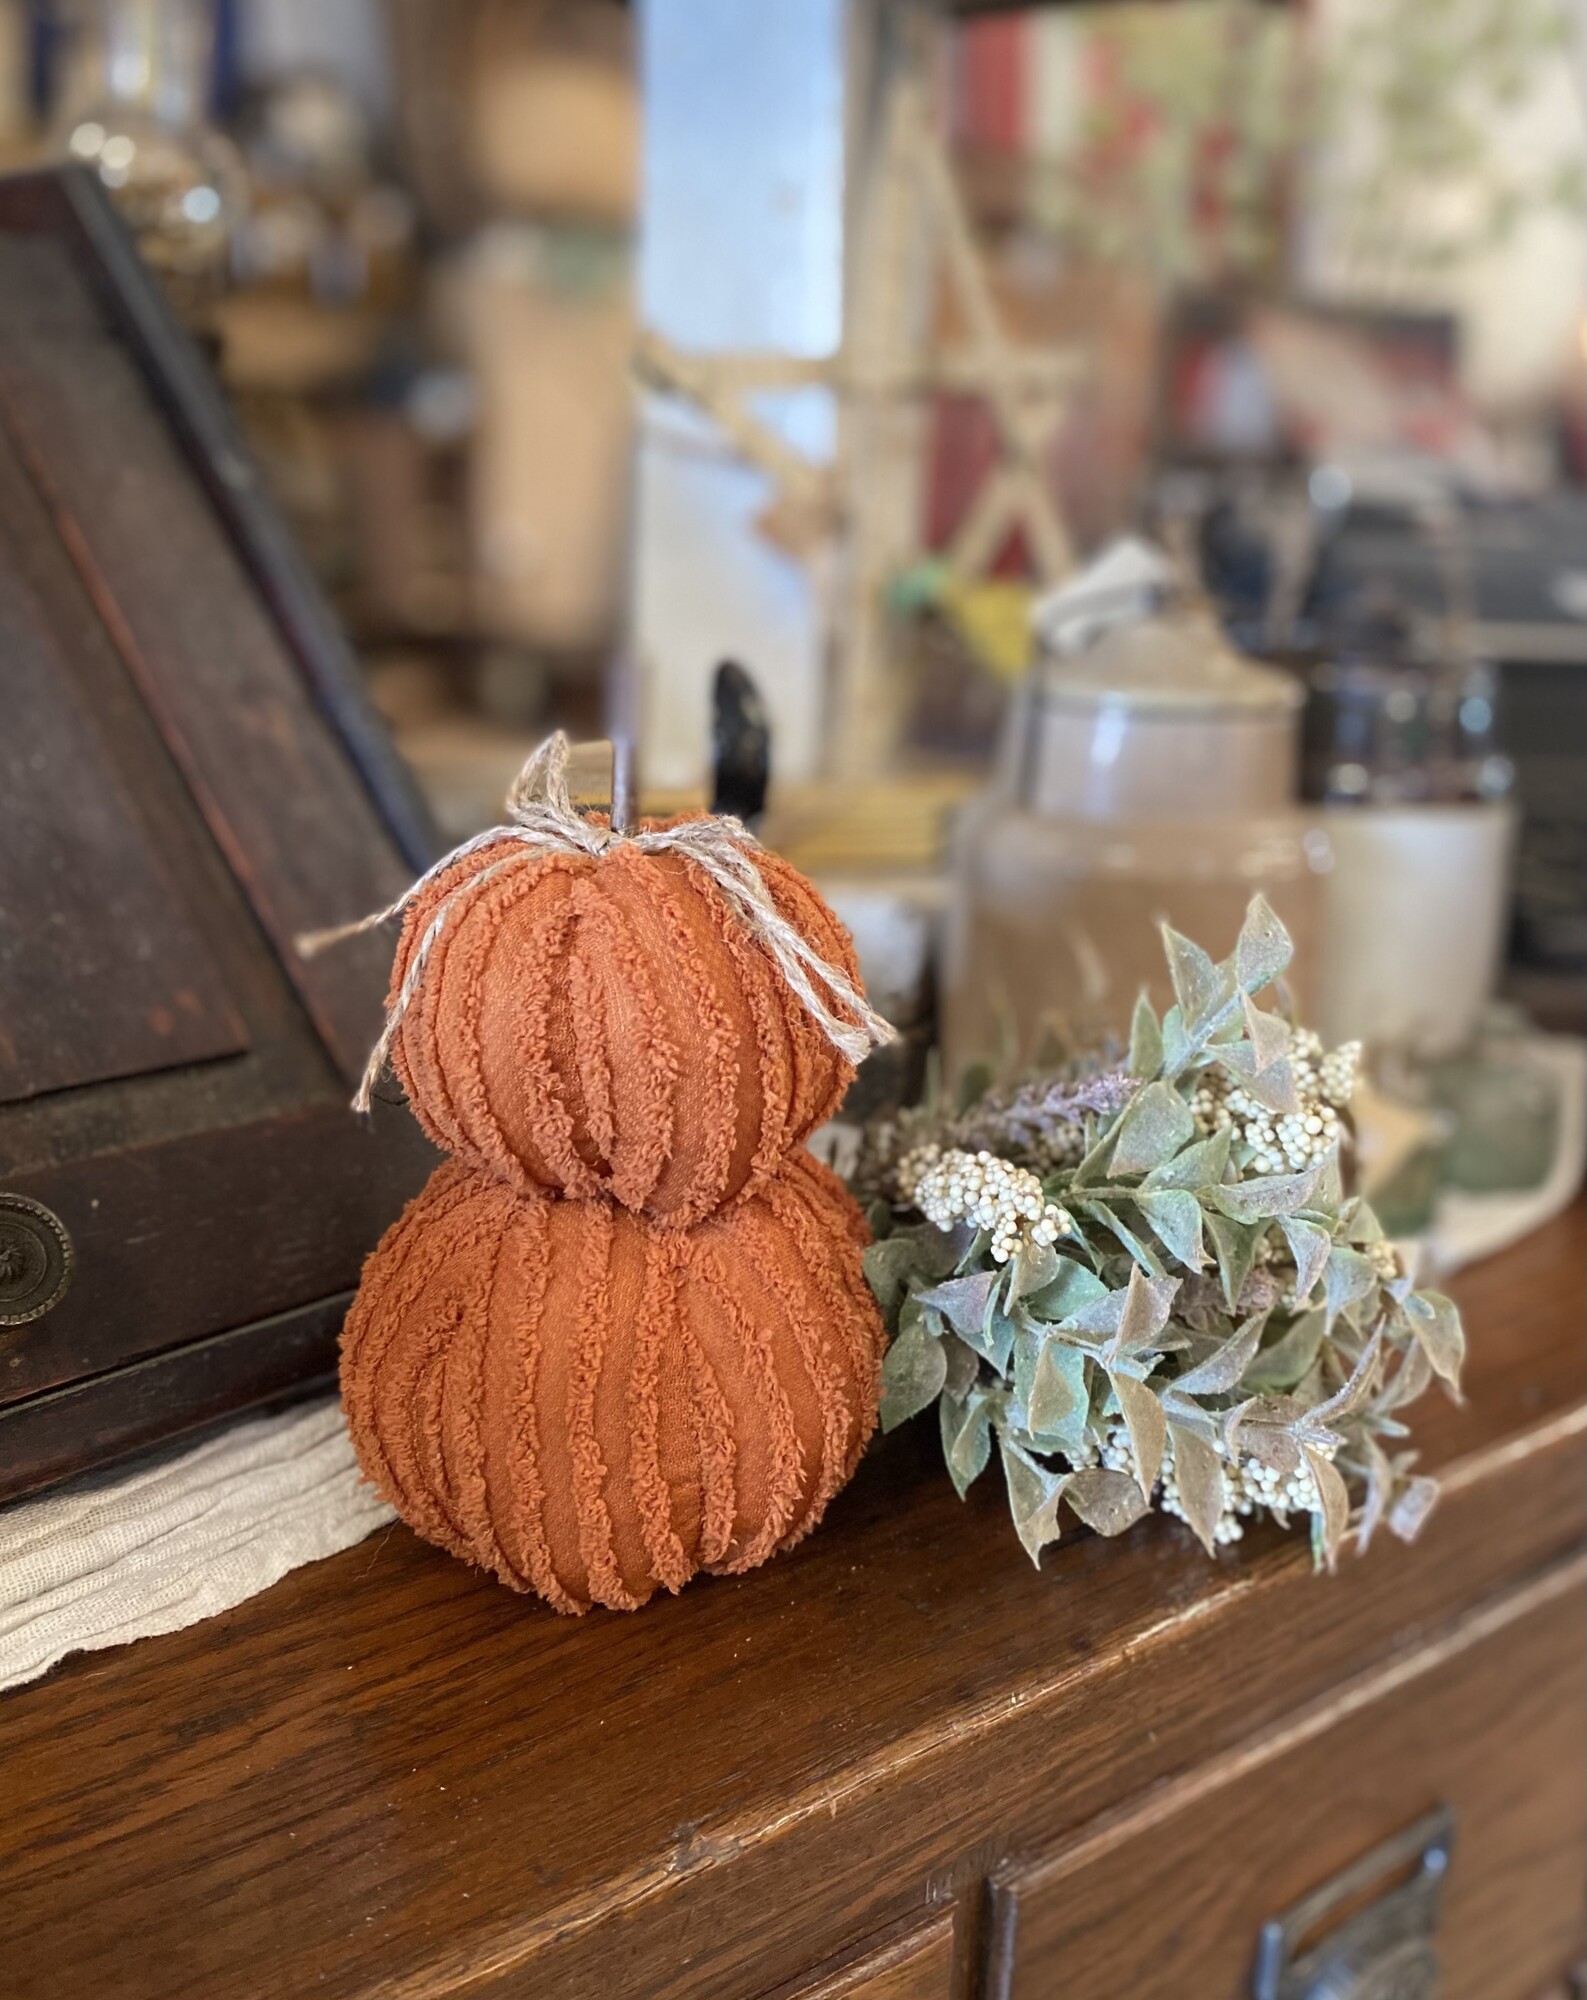 Mini orange pumpkin stack is made of soft chenille fabric in a burnt orange color and looks great displayed in bowls; baskets; or table tops.  The top of the stack has a stick stem with a jute bow and it measures 7.25 inches tall by 5 inches wide at base